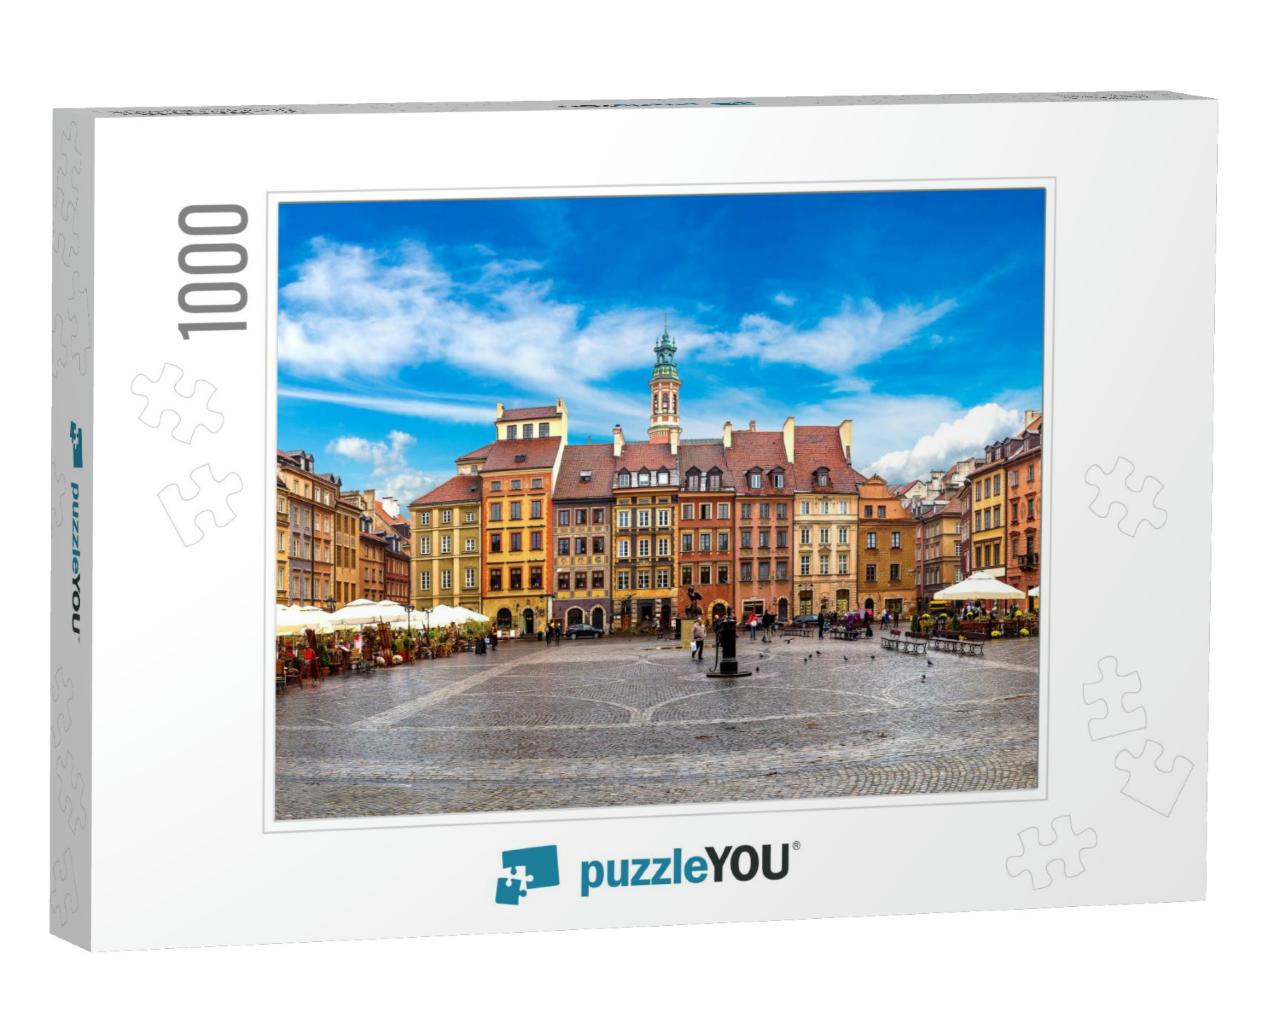 Old Town Square in Warsaw in a Summer Day, Poland... Jigsaw Puzzle with 1000 pieces